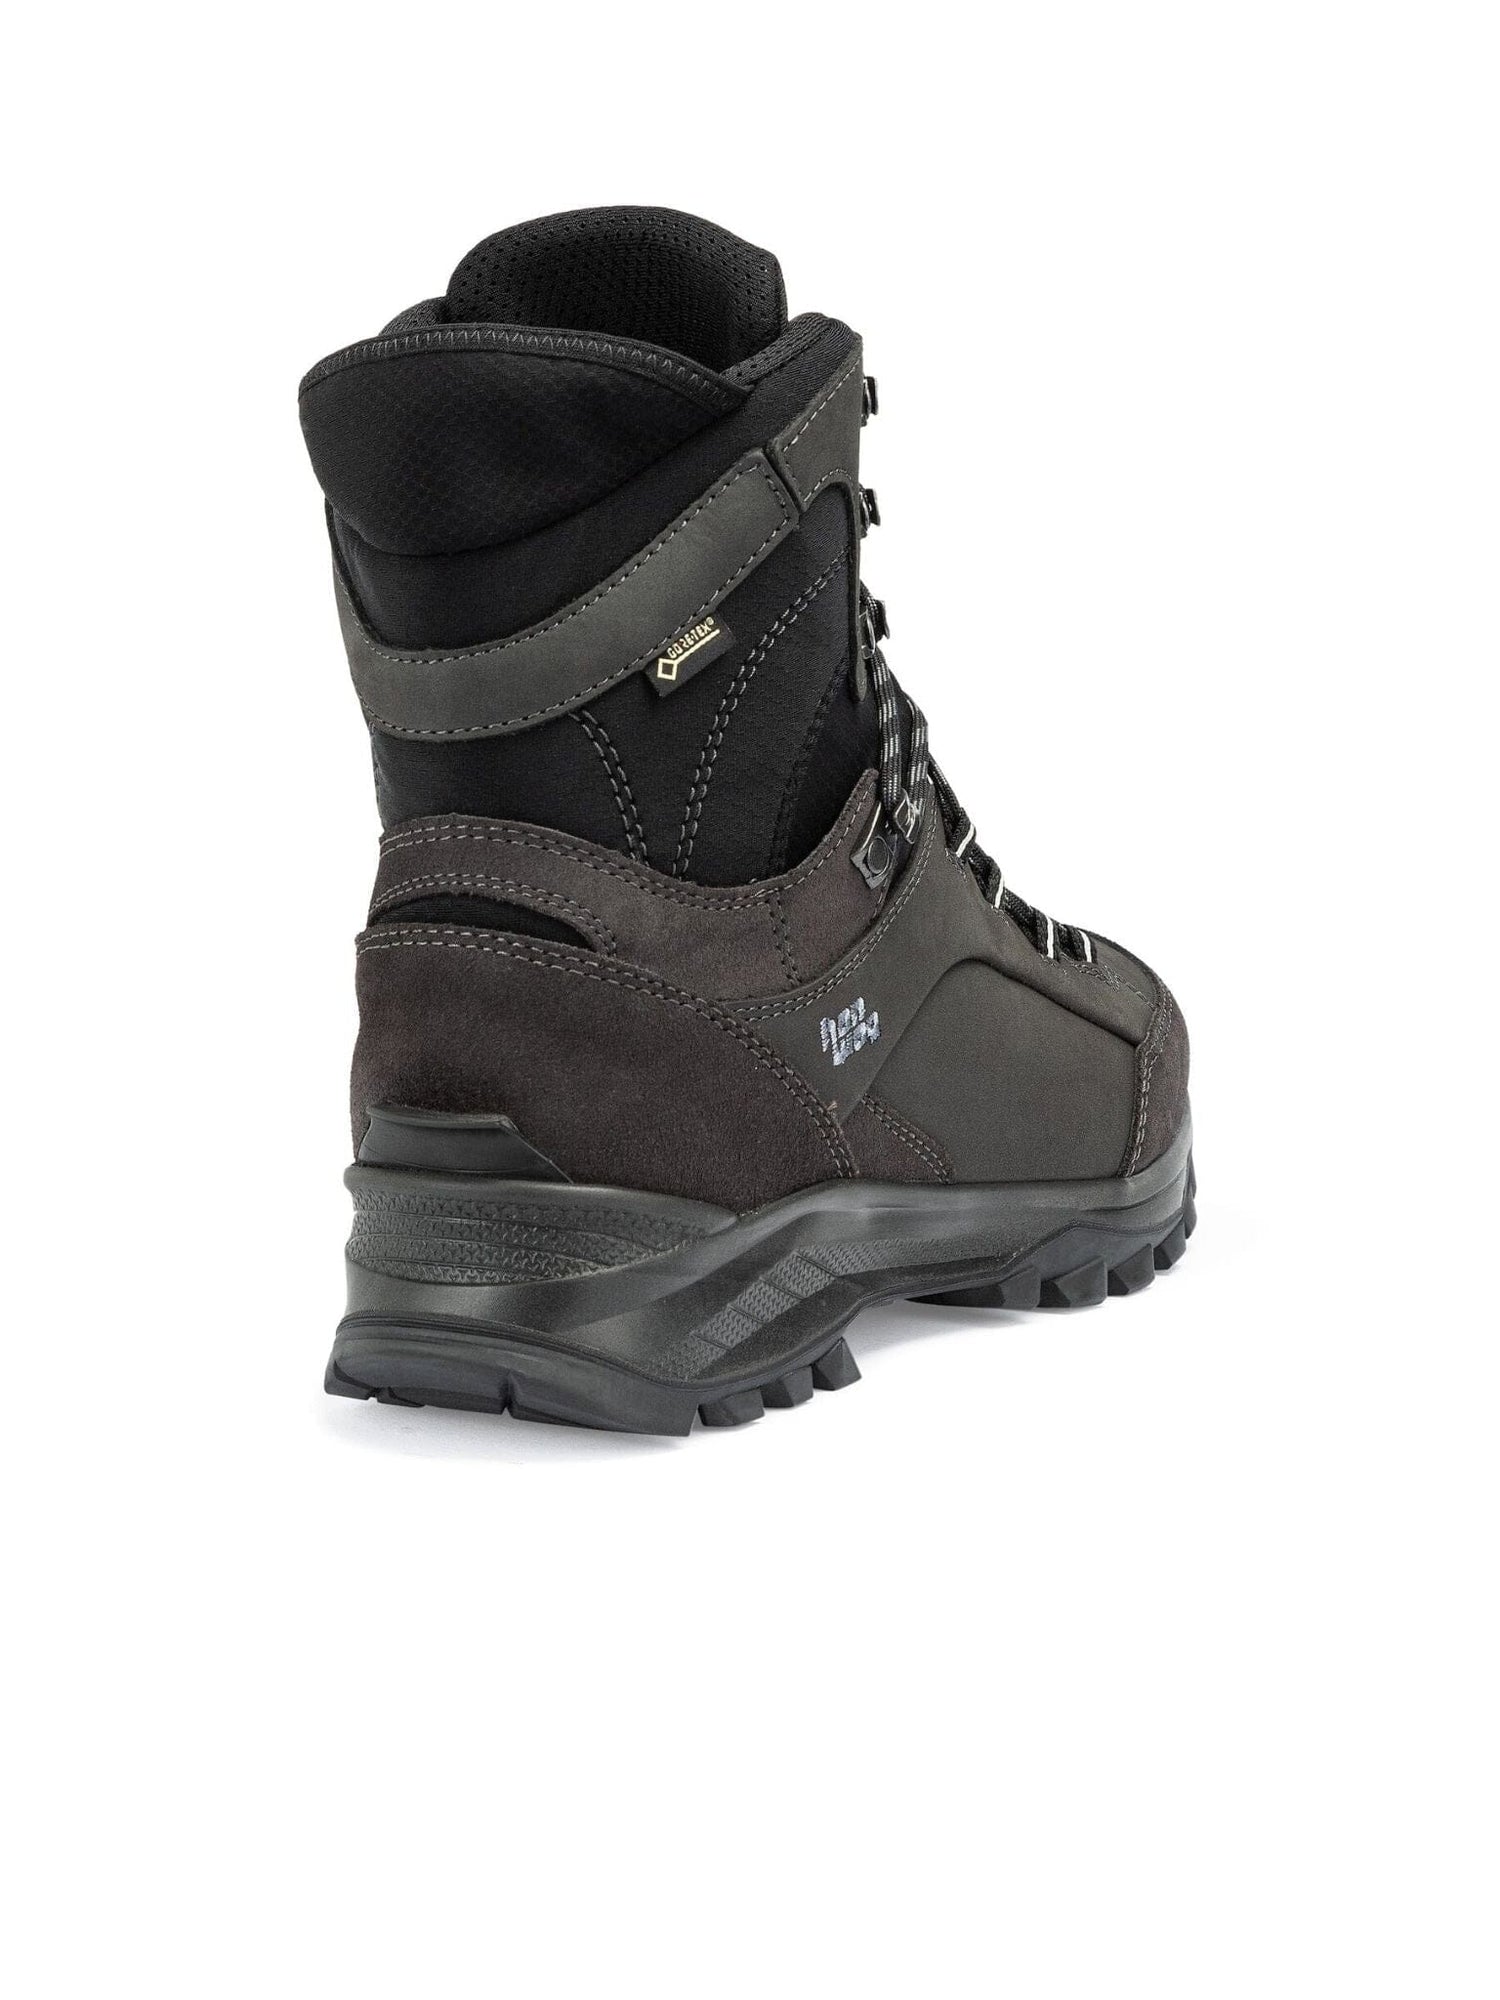 Hanwag M's Banks Snow GTX - Leather Working Group -certified nubuck leather Asphalt/Black Shoes